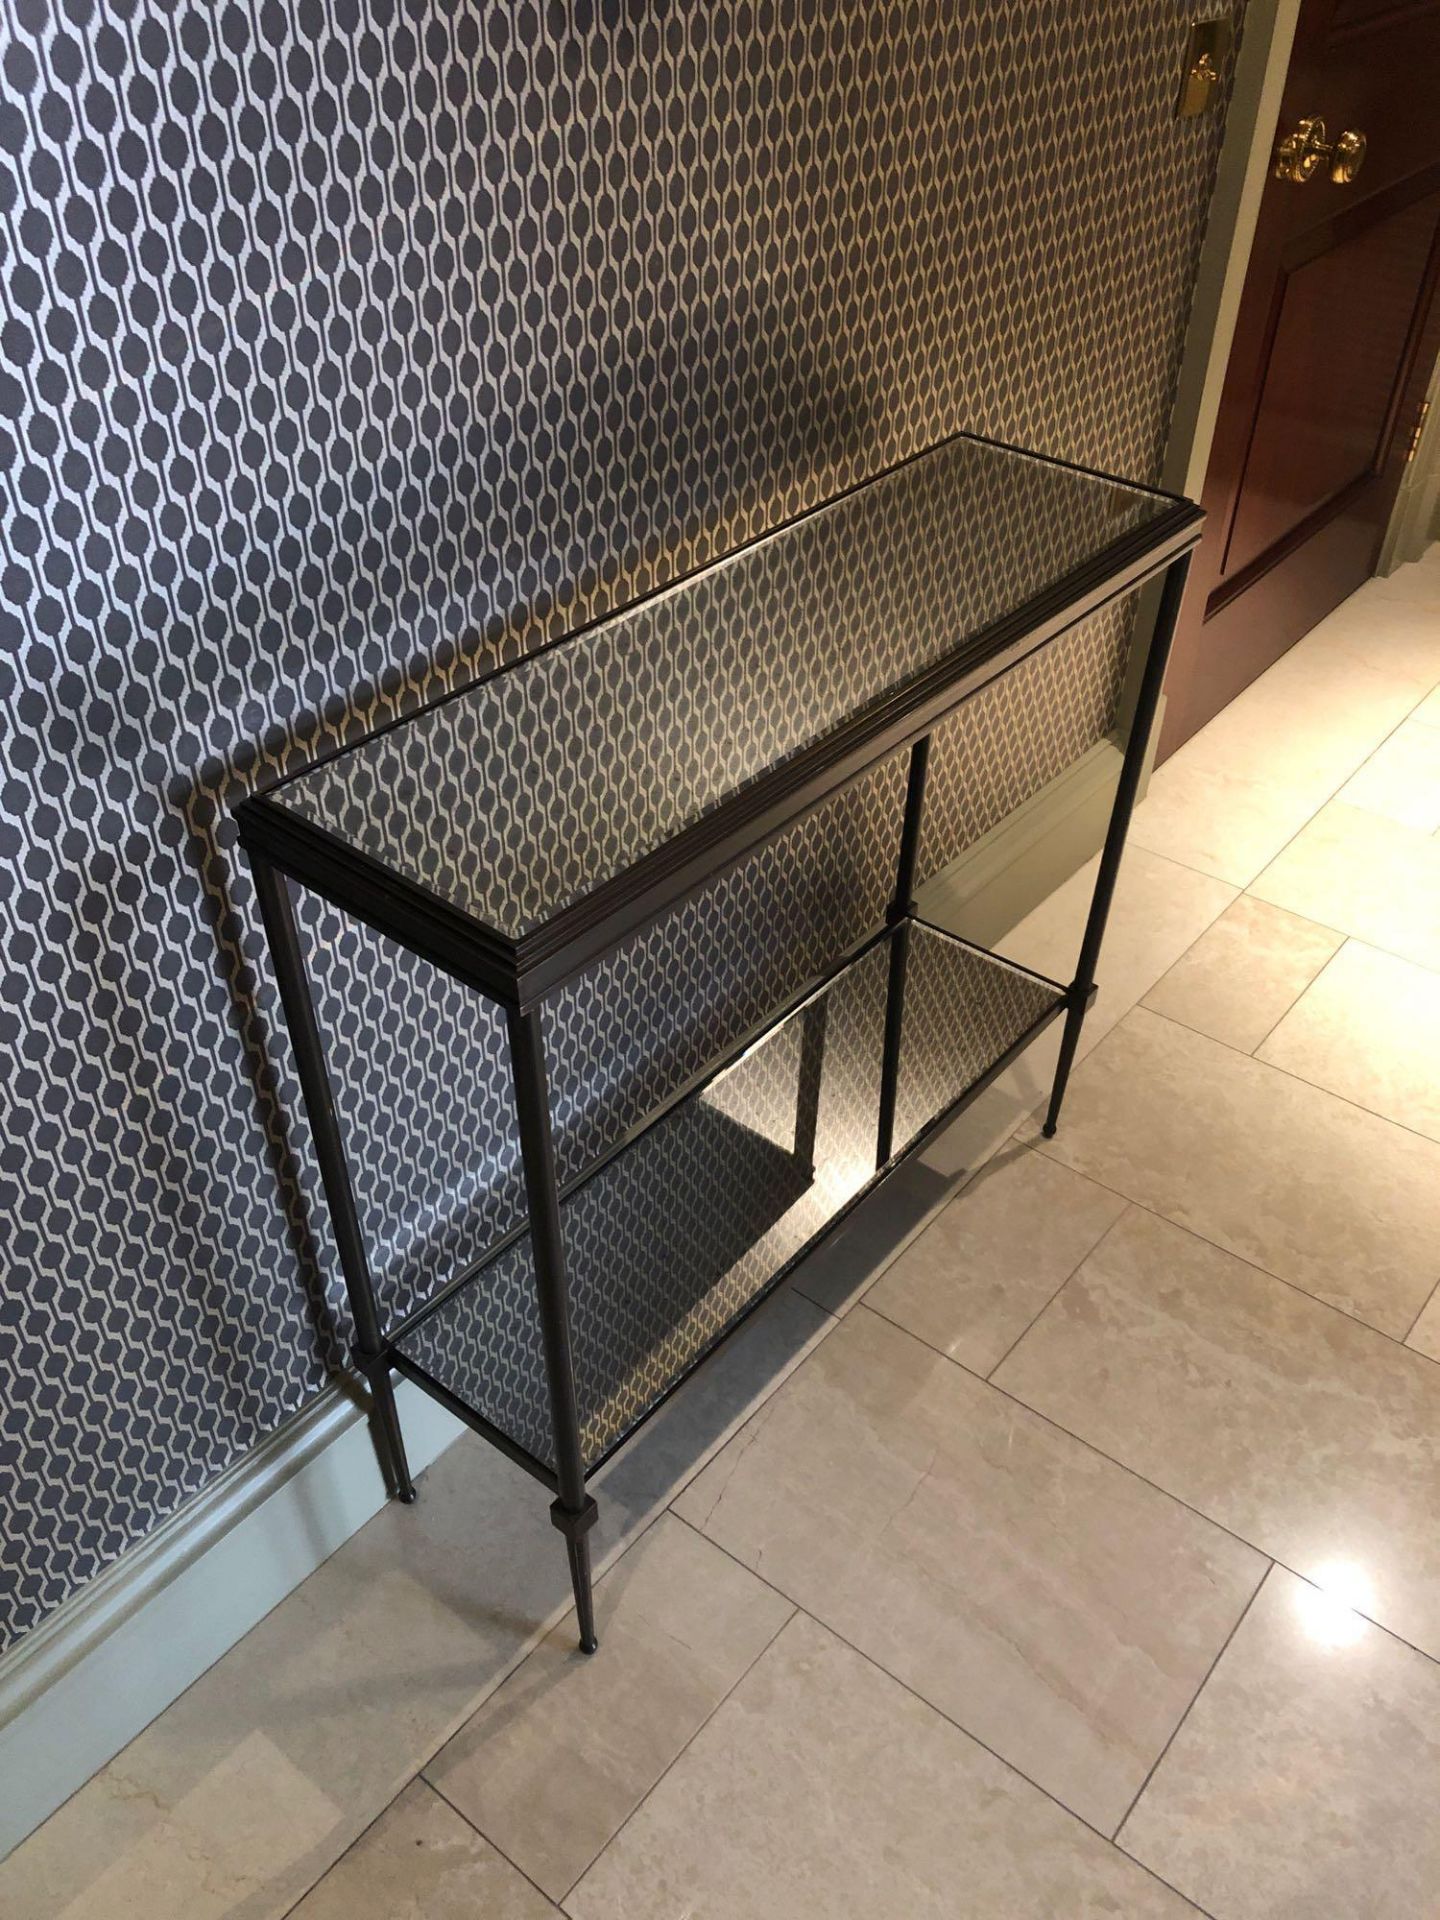 A Forged Metal Two Tier Console Table With Glass Shelves 88 x 24 x 74cm (Room 519)